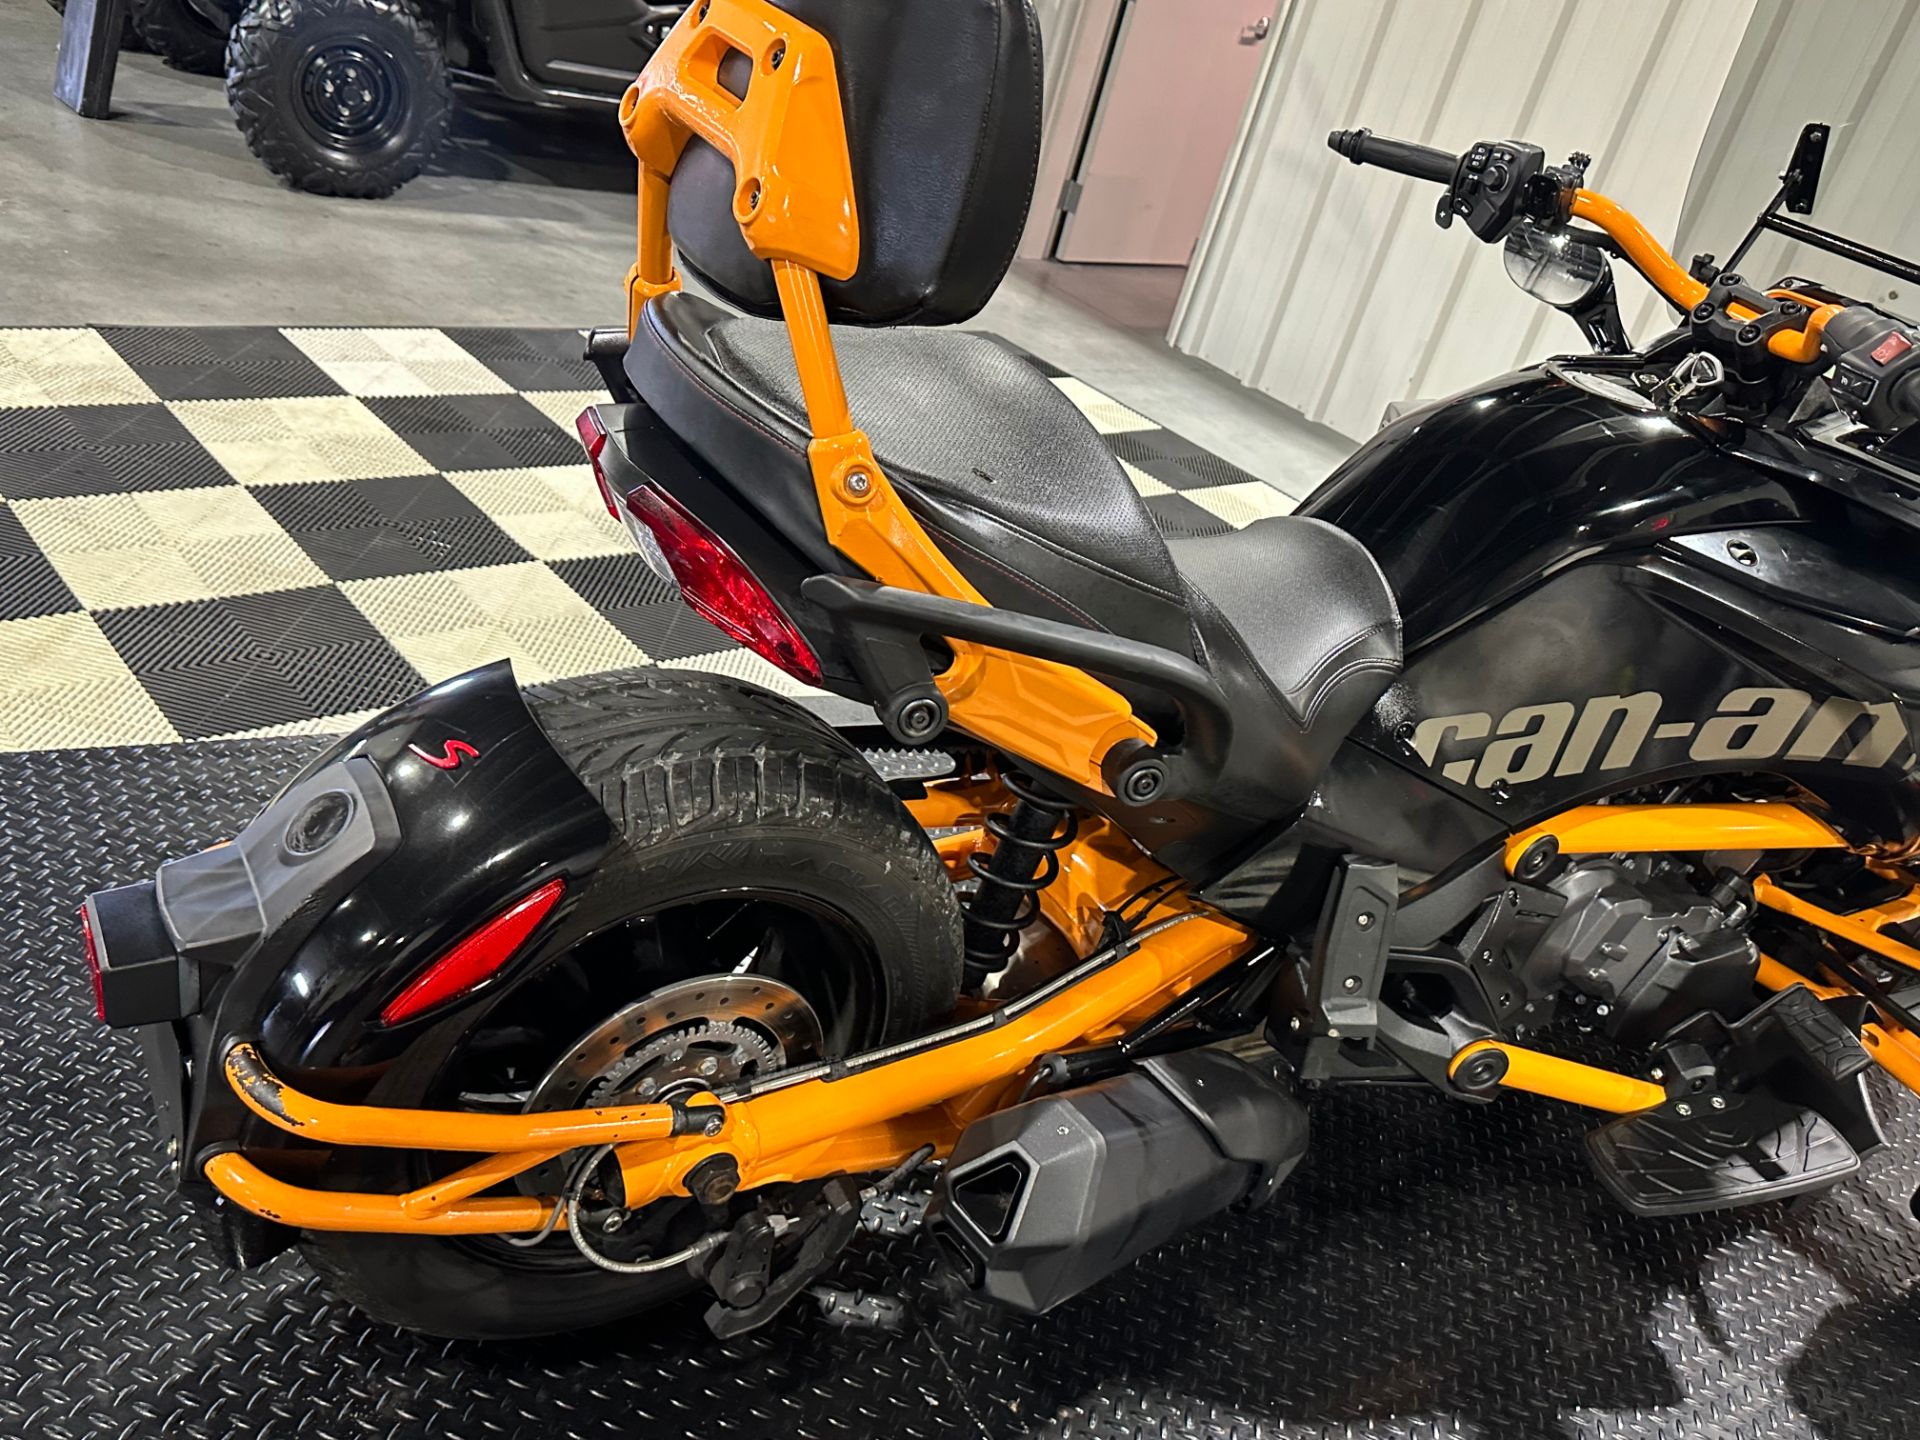 2019 Can-Am Spyder F3-S SE6 in Utica, New York - Photo 18